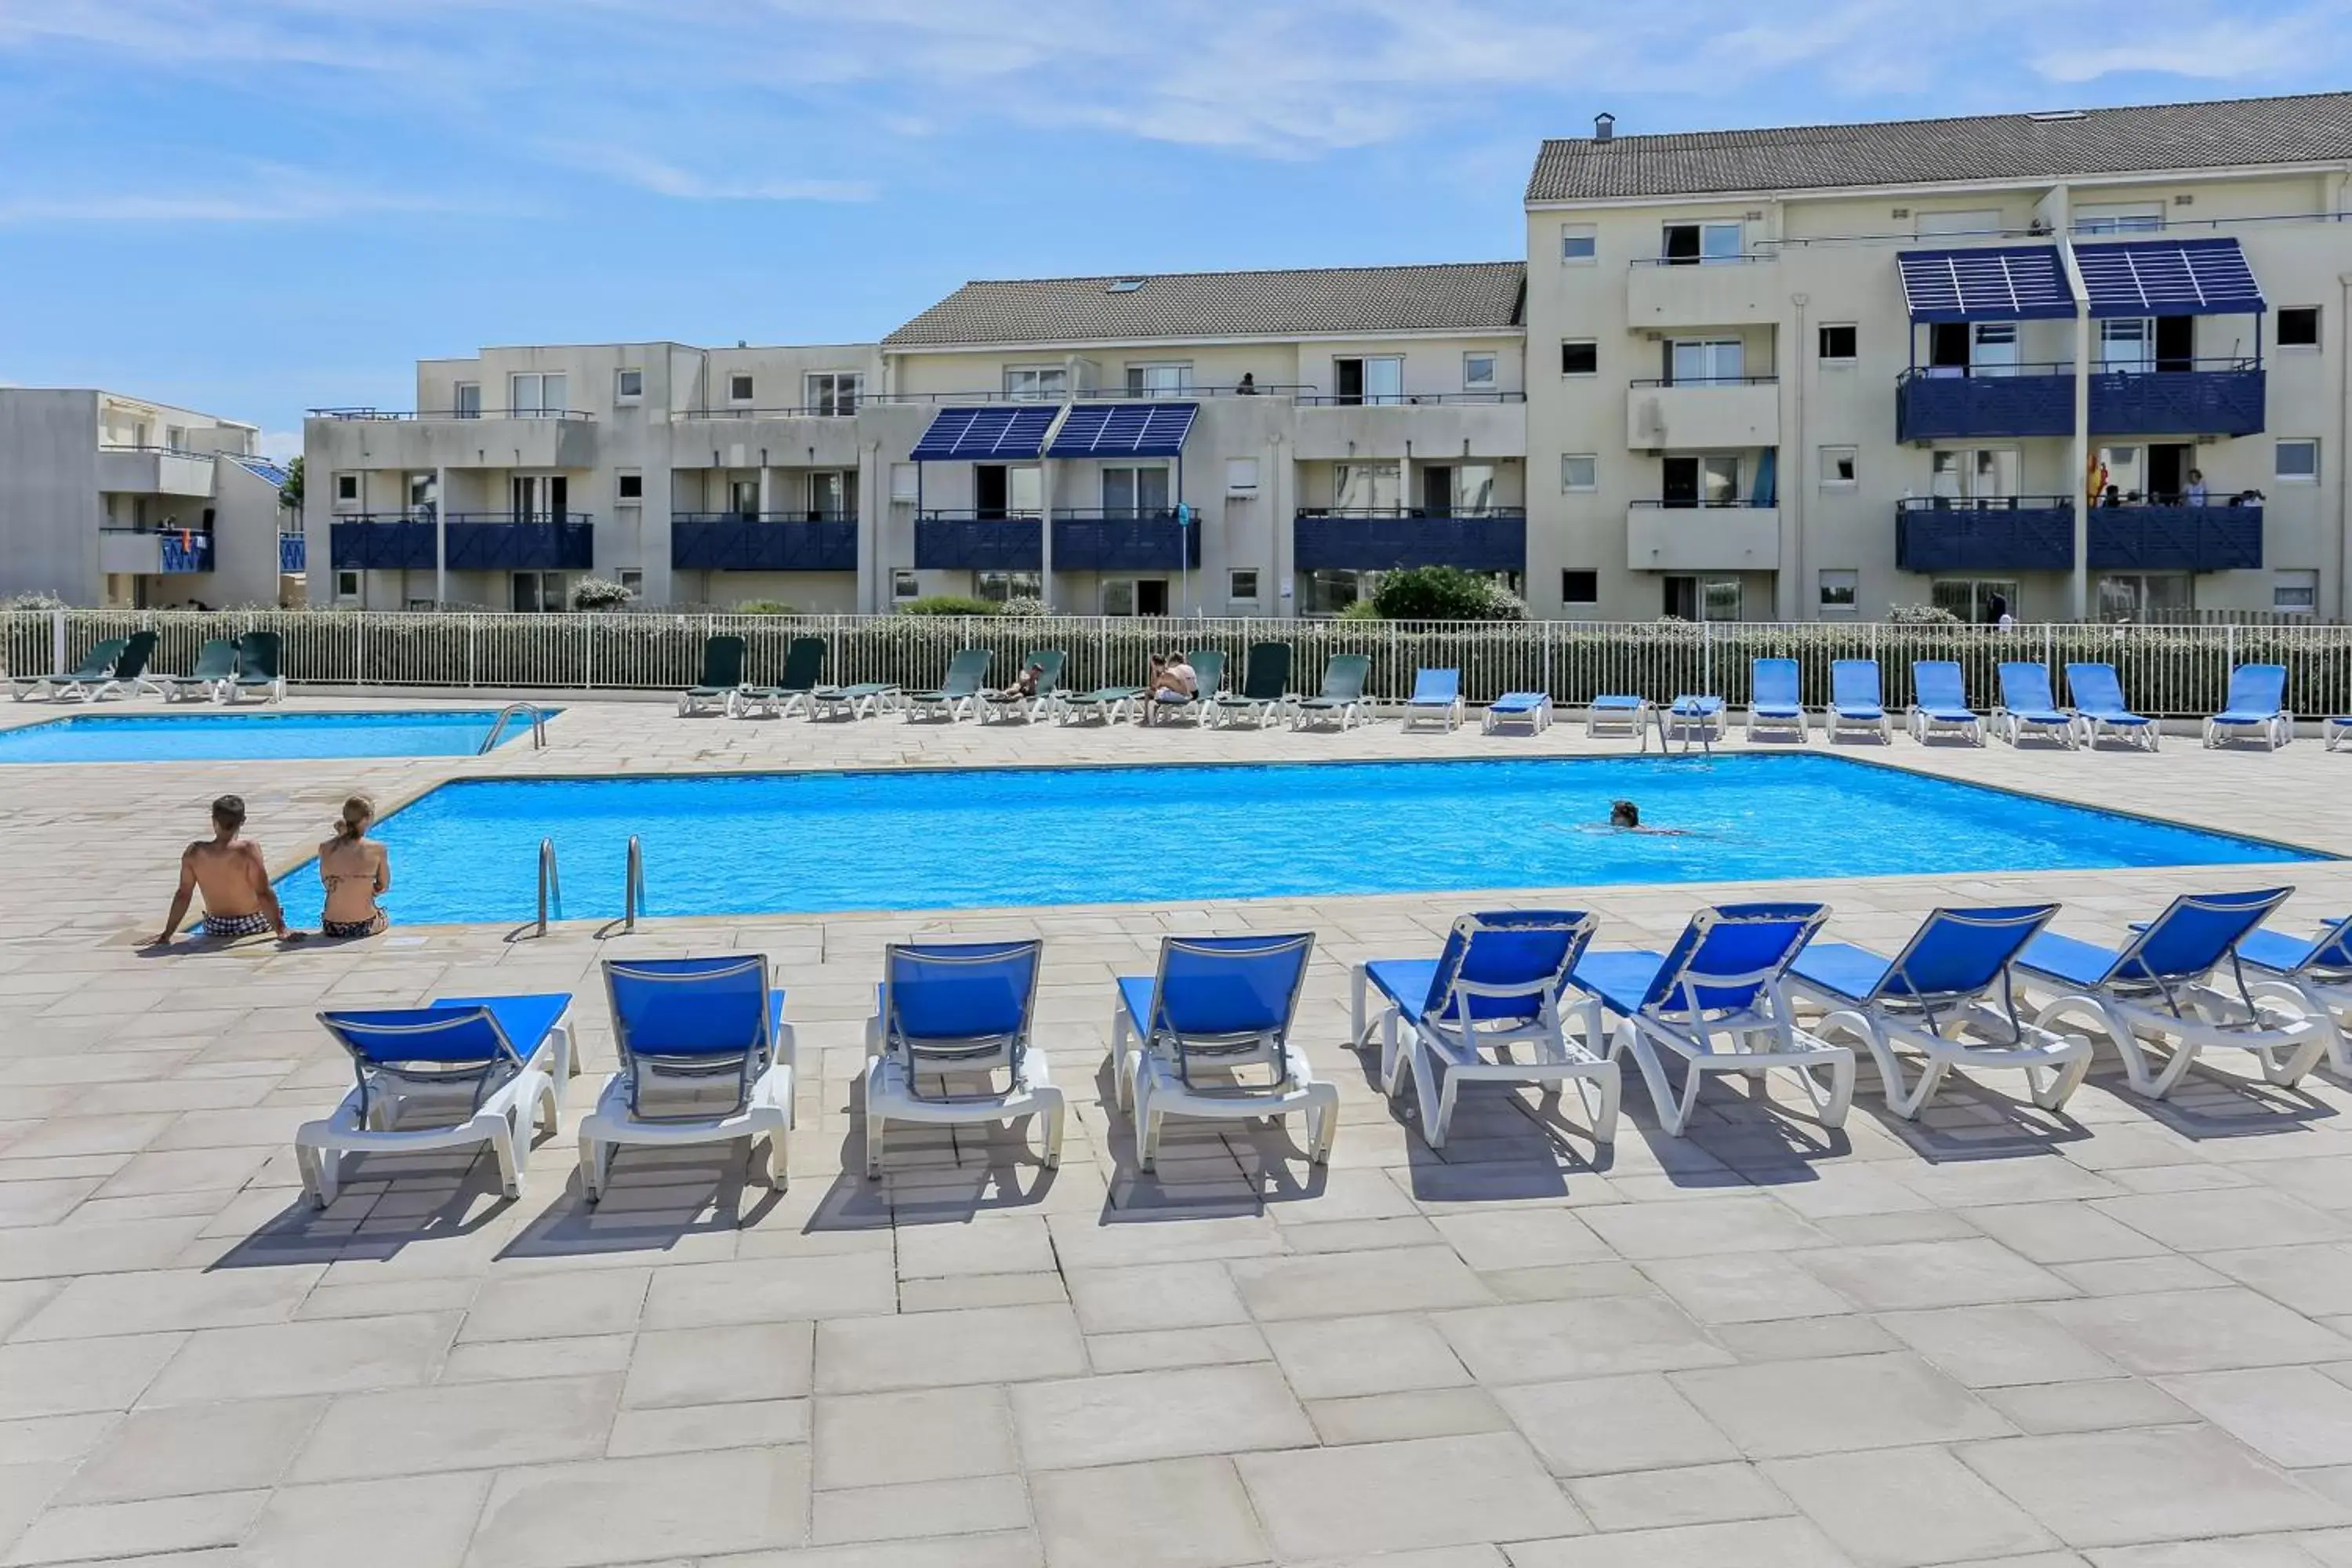 Property building, Swimming Pool in Résidence Pierre & Vacances Bleu Marine